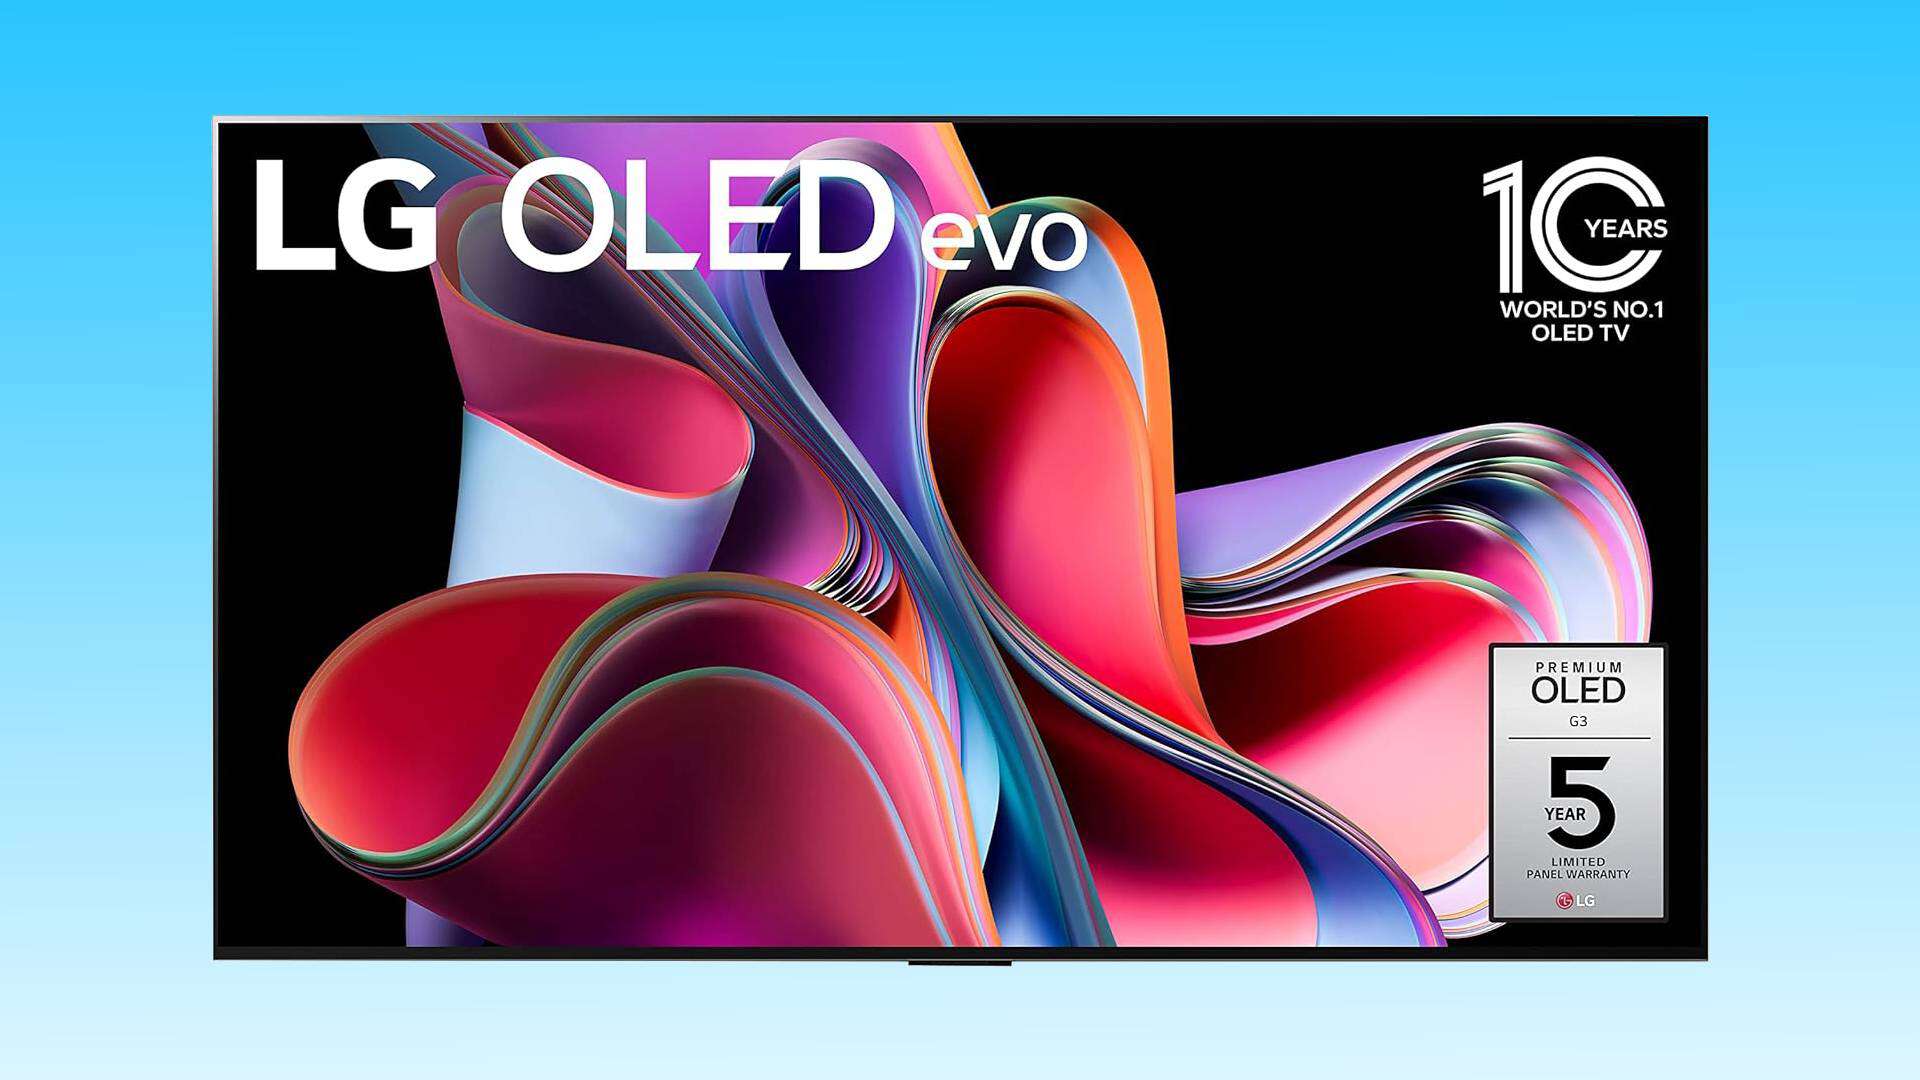 LG OLED EVO TV with colorful abstract design displayed on the screen, advertising its status as the world's no. 1 OLED TV for 10 years, featuring premium OLED technology and a 5